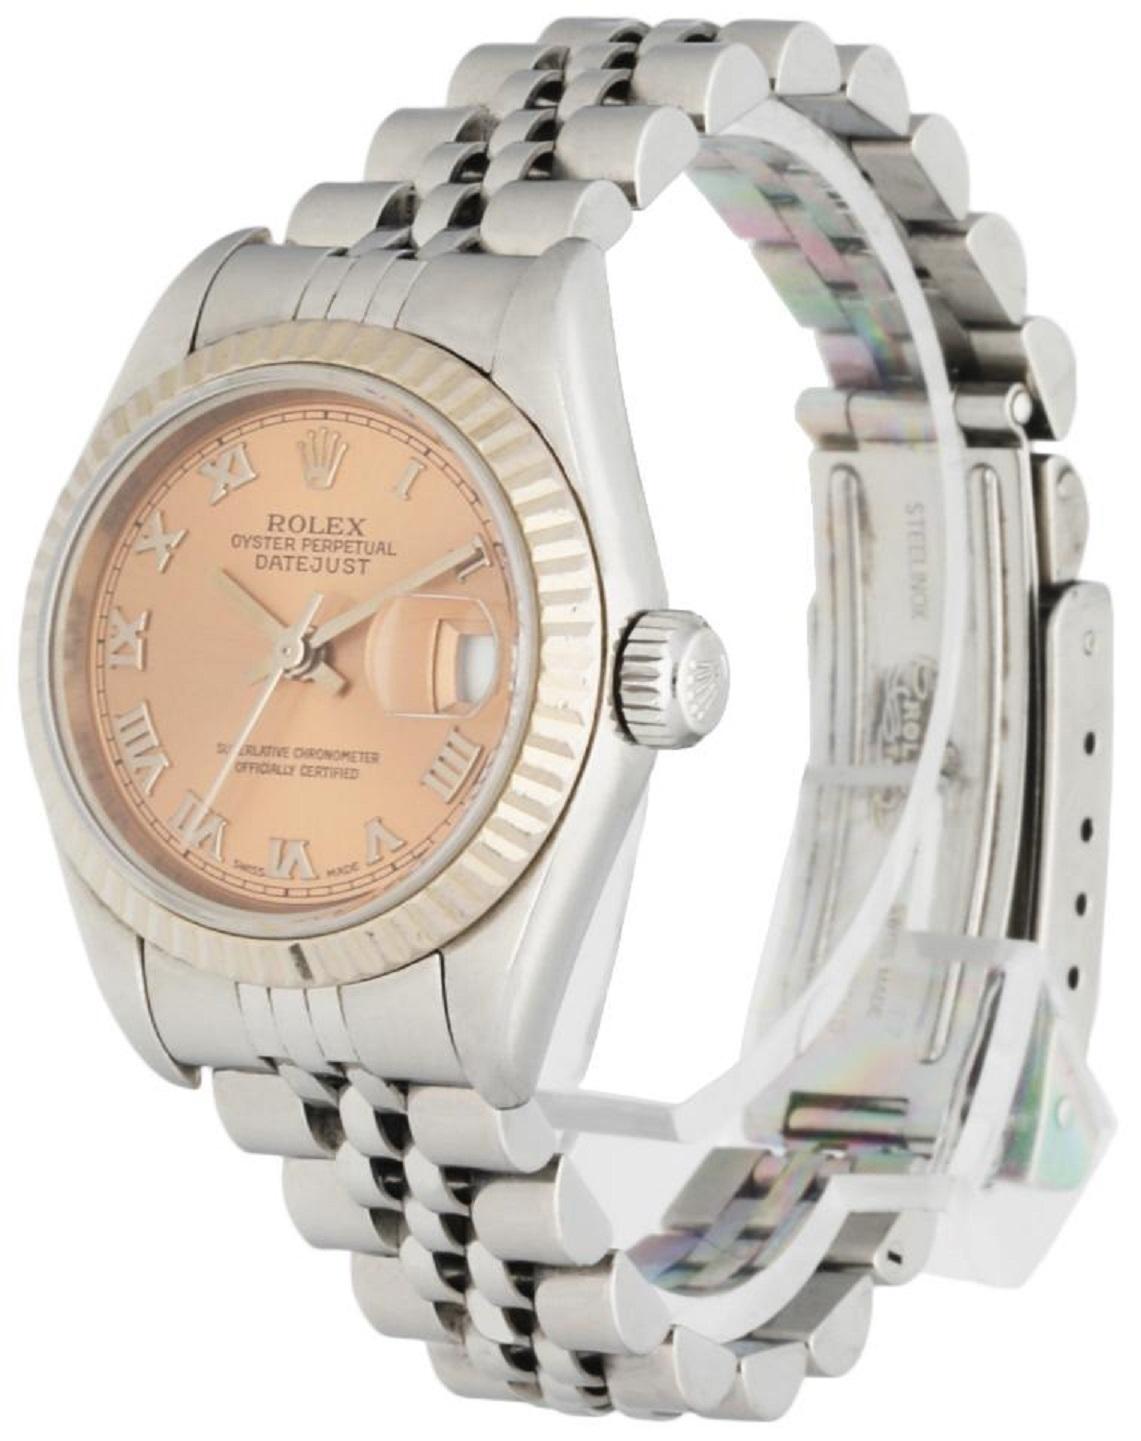 Rolex Oyster Perpetual Datejust 79174 Ladies Watch. Stainless steel 26mm case. 18k white gold fluted bezel. Pink dial with steel hands and markers. Date aperture. Stainless steel jubilee bracelet with folding clasp, will fit up to a 5.75 inch wrist.